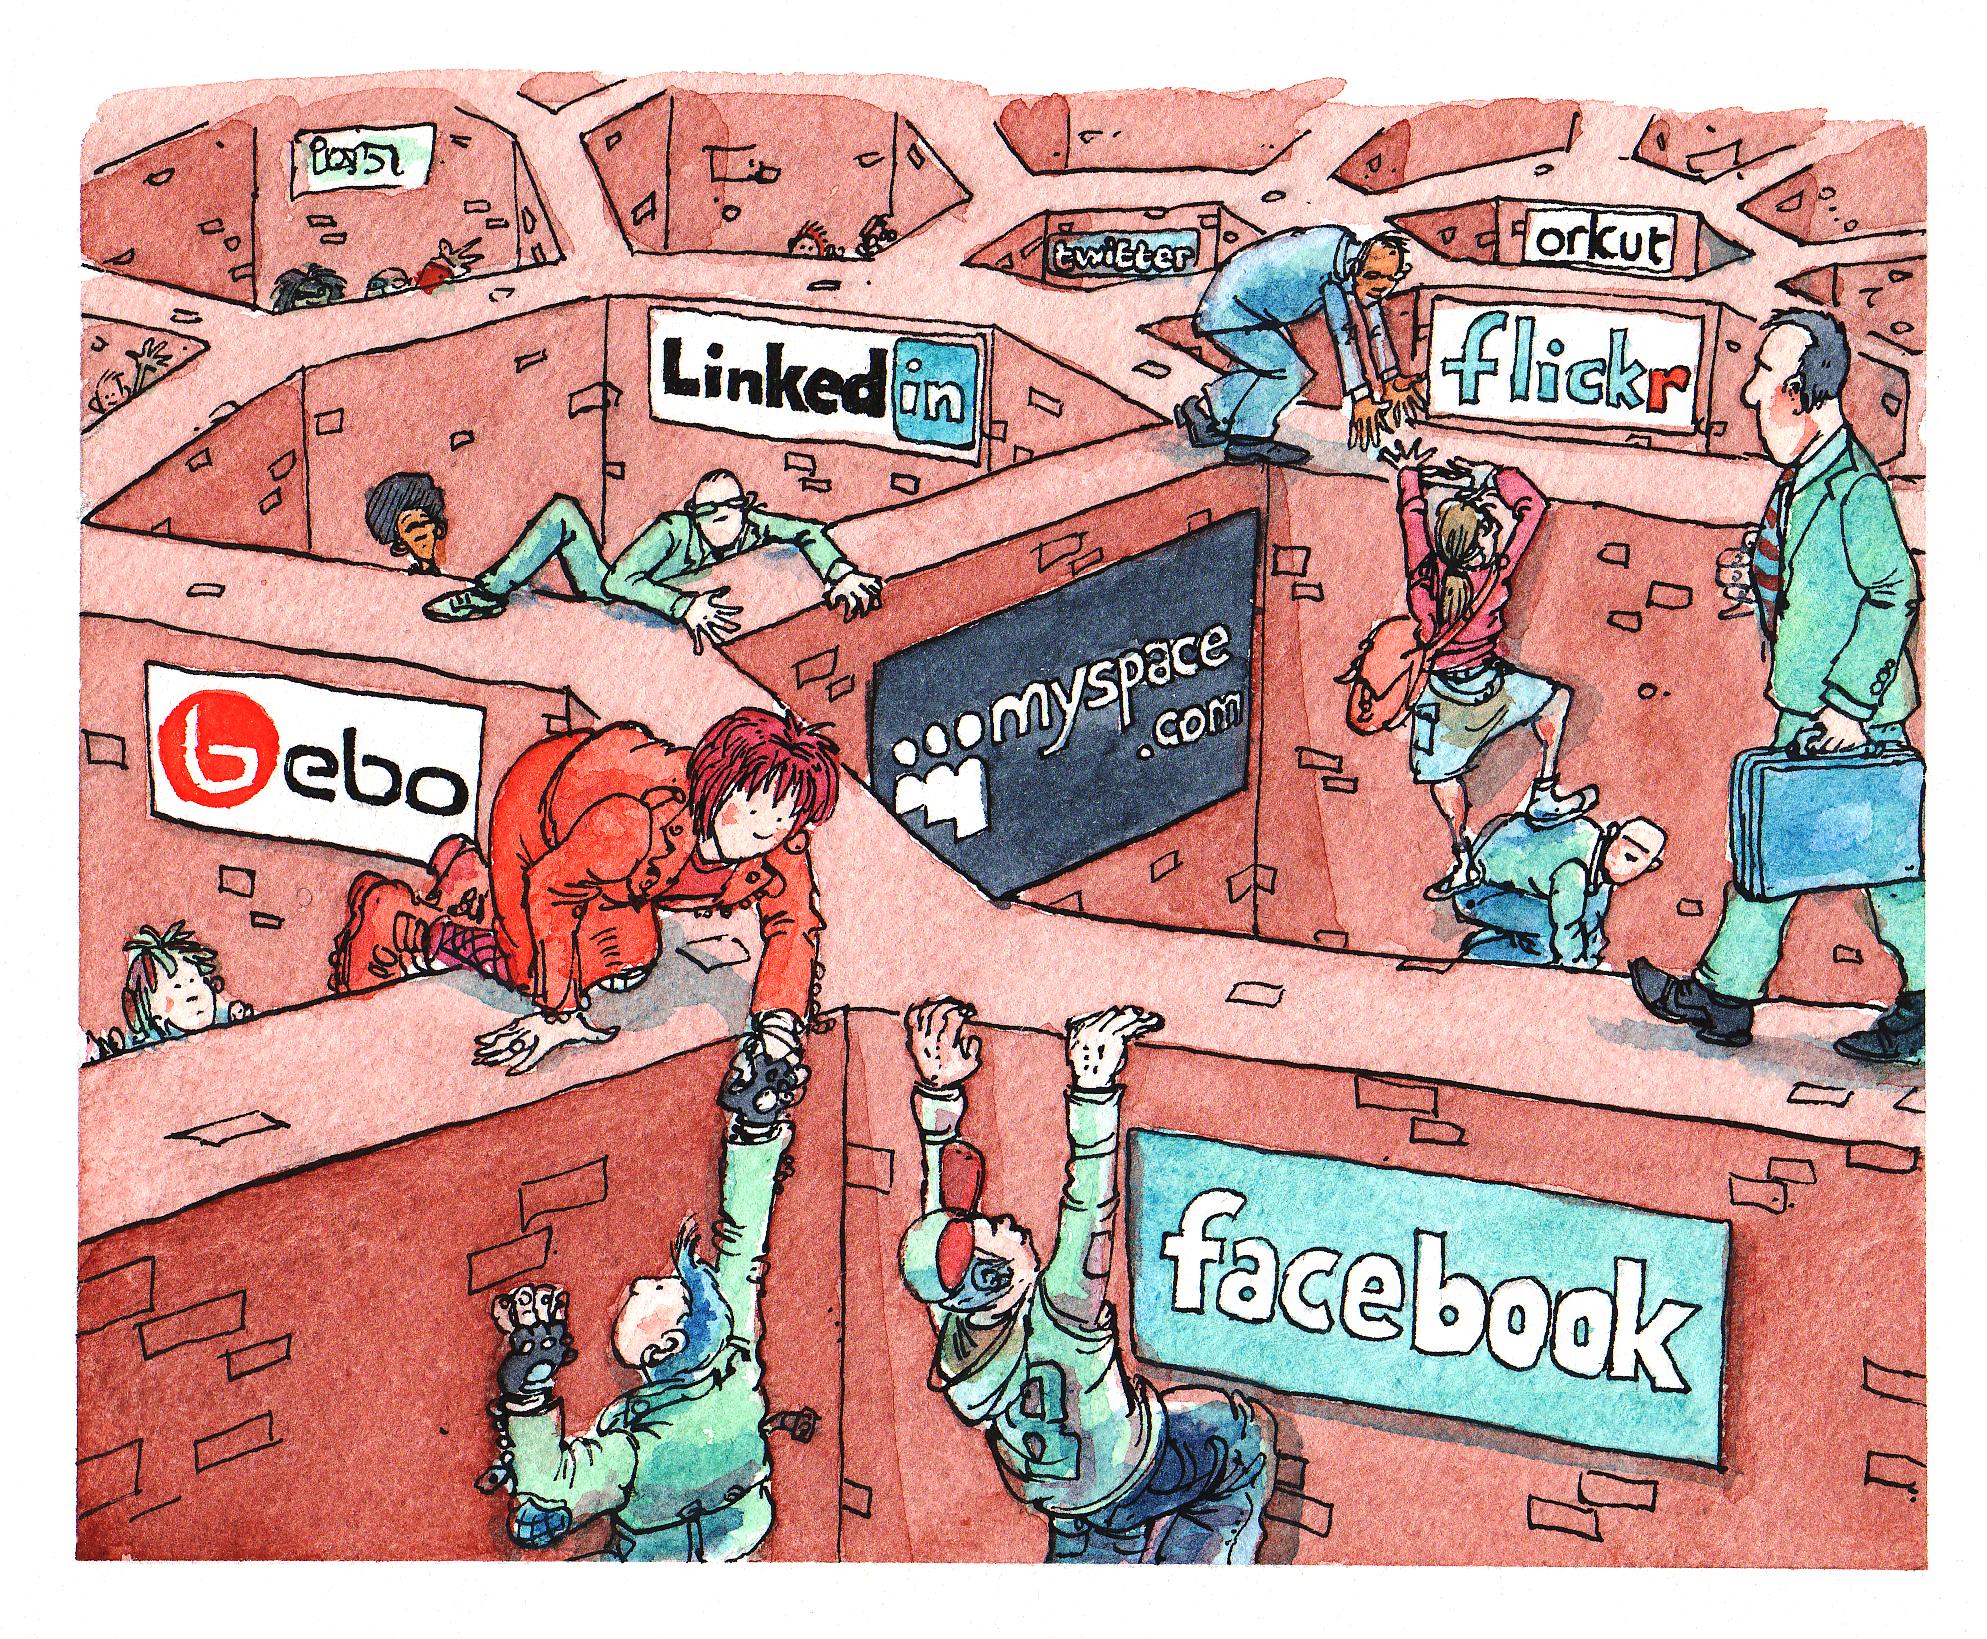 An Economist cartoon showing people in physical pens like prison cells each labelled for each social media platform, trying in vain to get from one to the othegr.